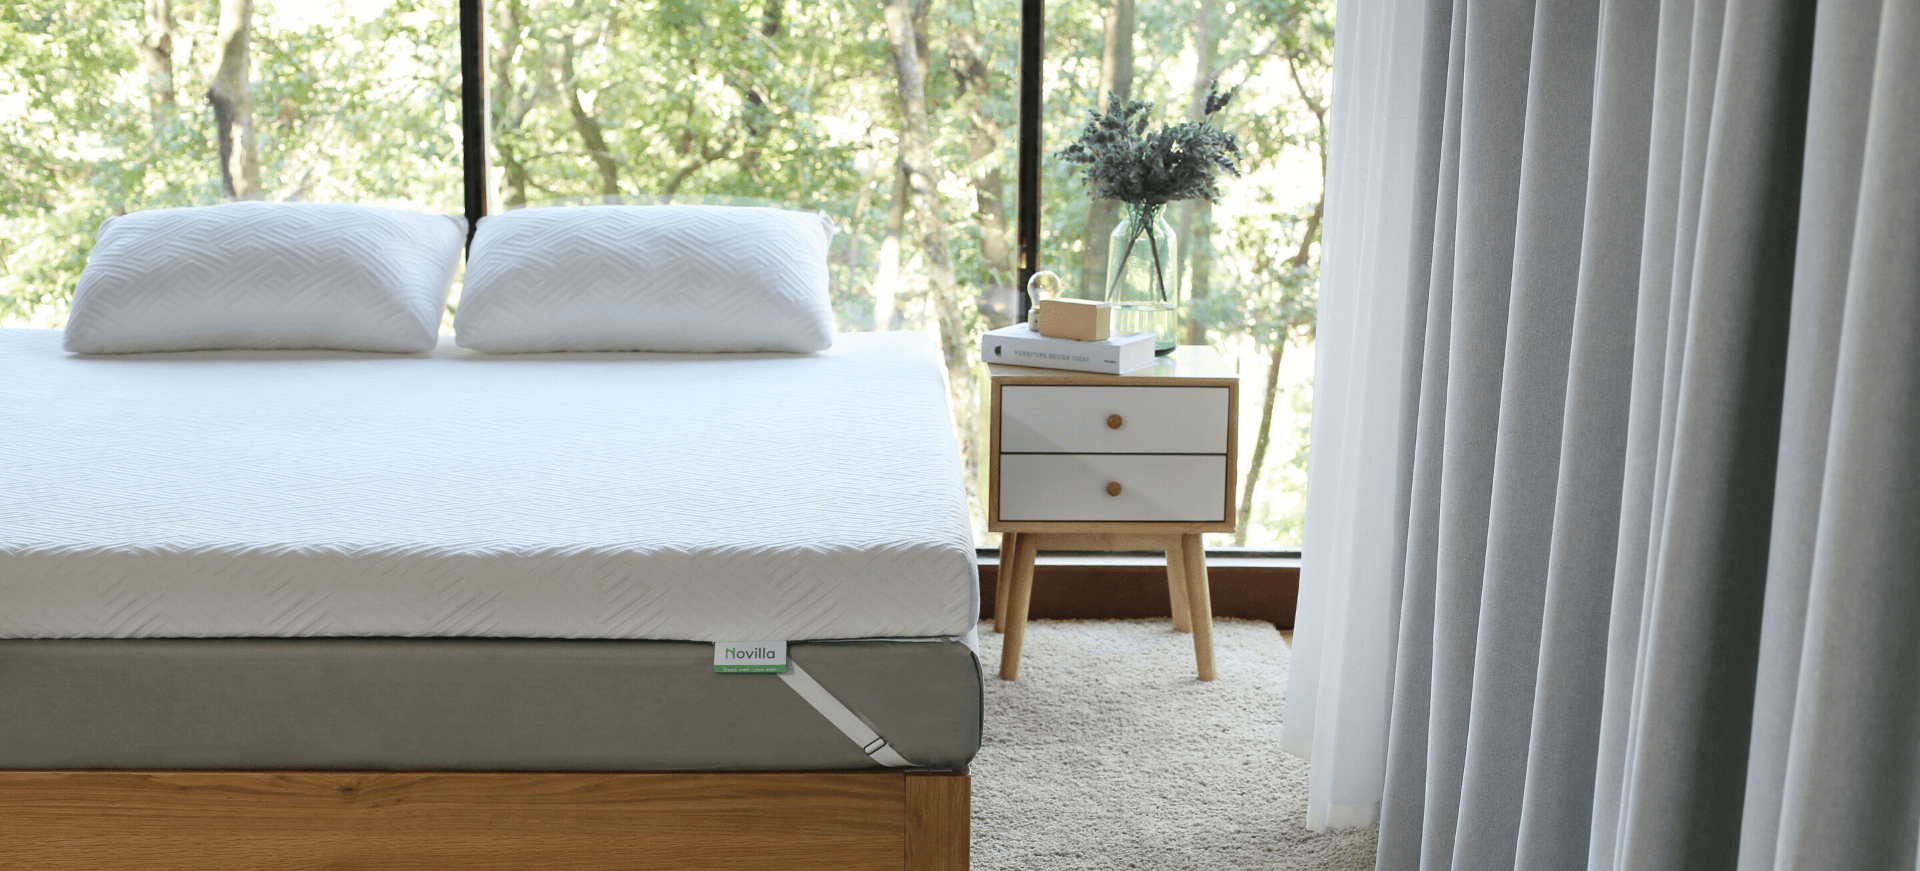 How To Keep a Mattress Topper From Sliding